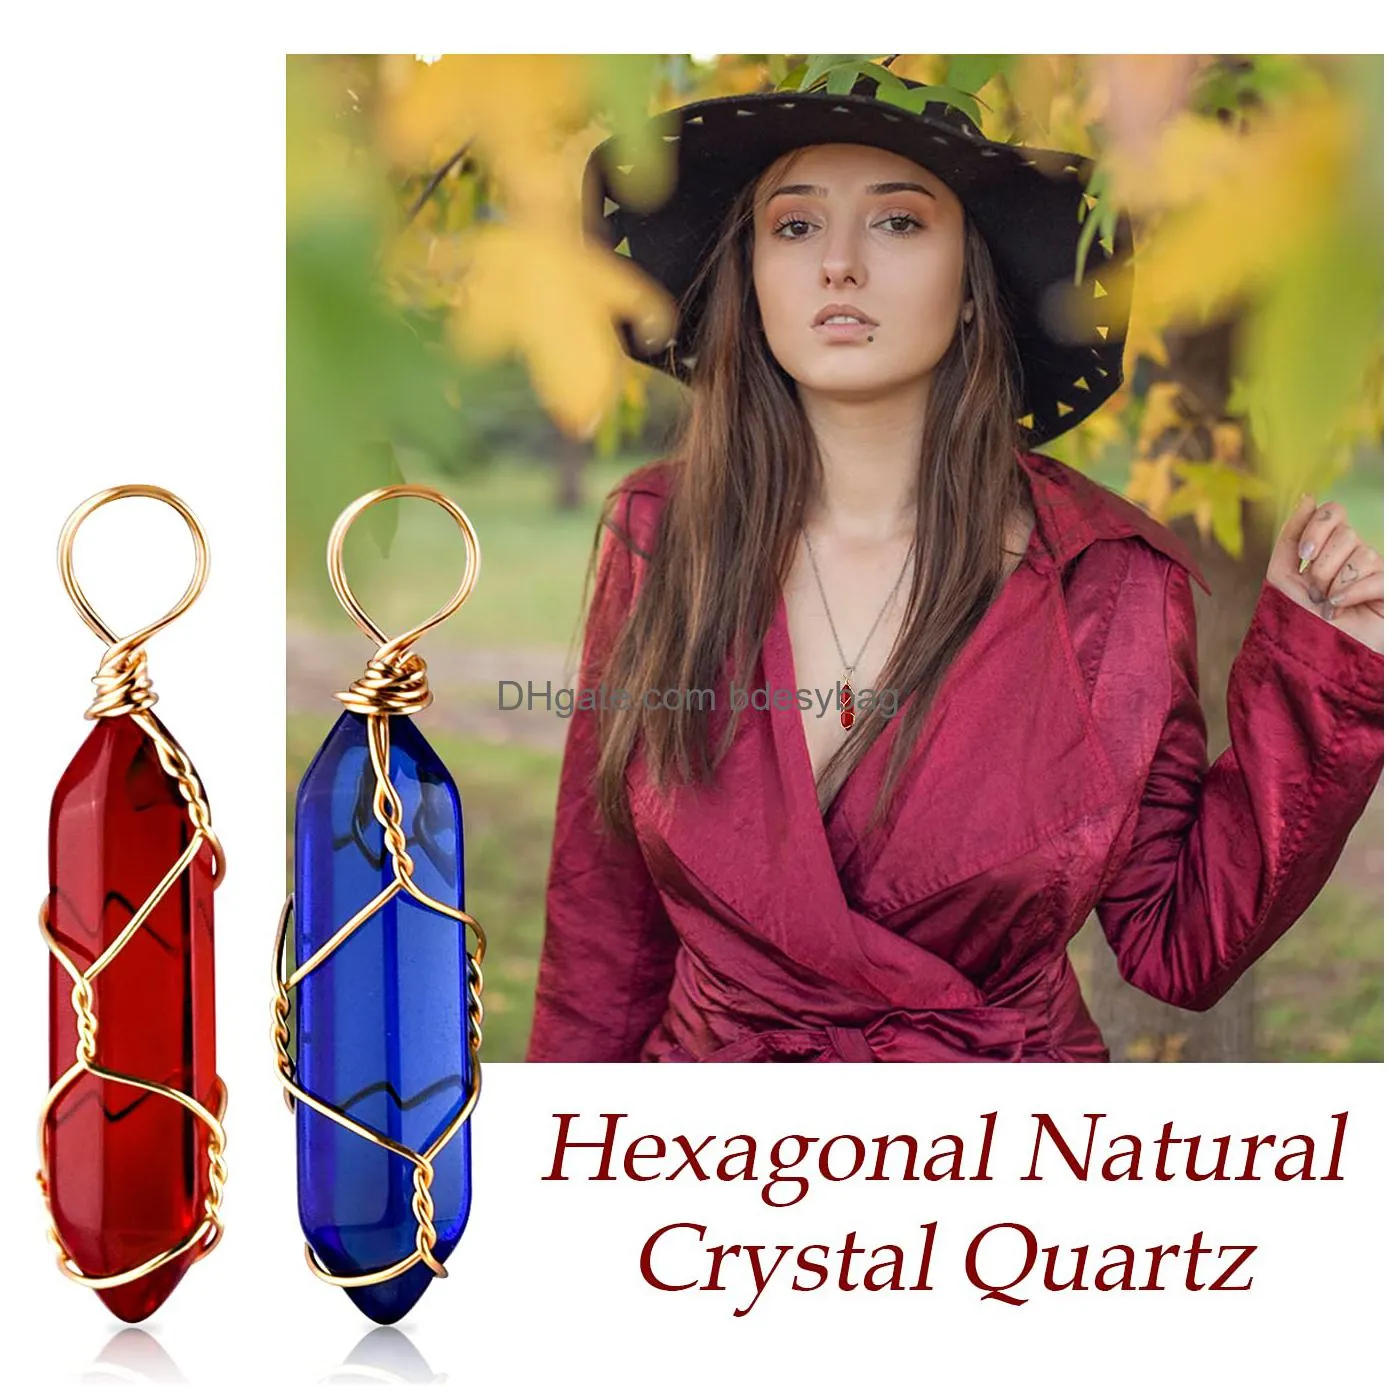 wxj13 hexagonal healing crystal natural crystal quartz pendant tree life wire wrapped gemstone pendant for necklace jewelry making for meditation crystal therapy